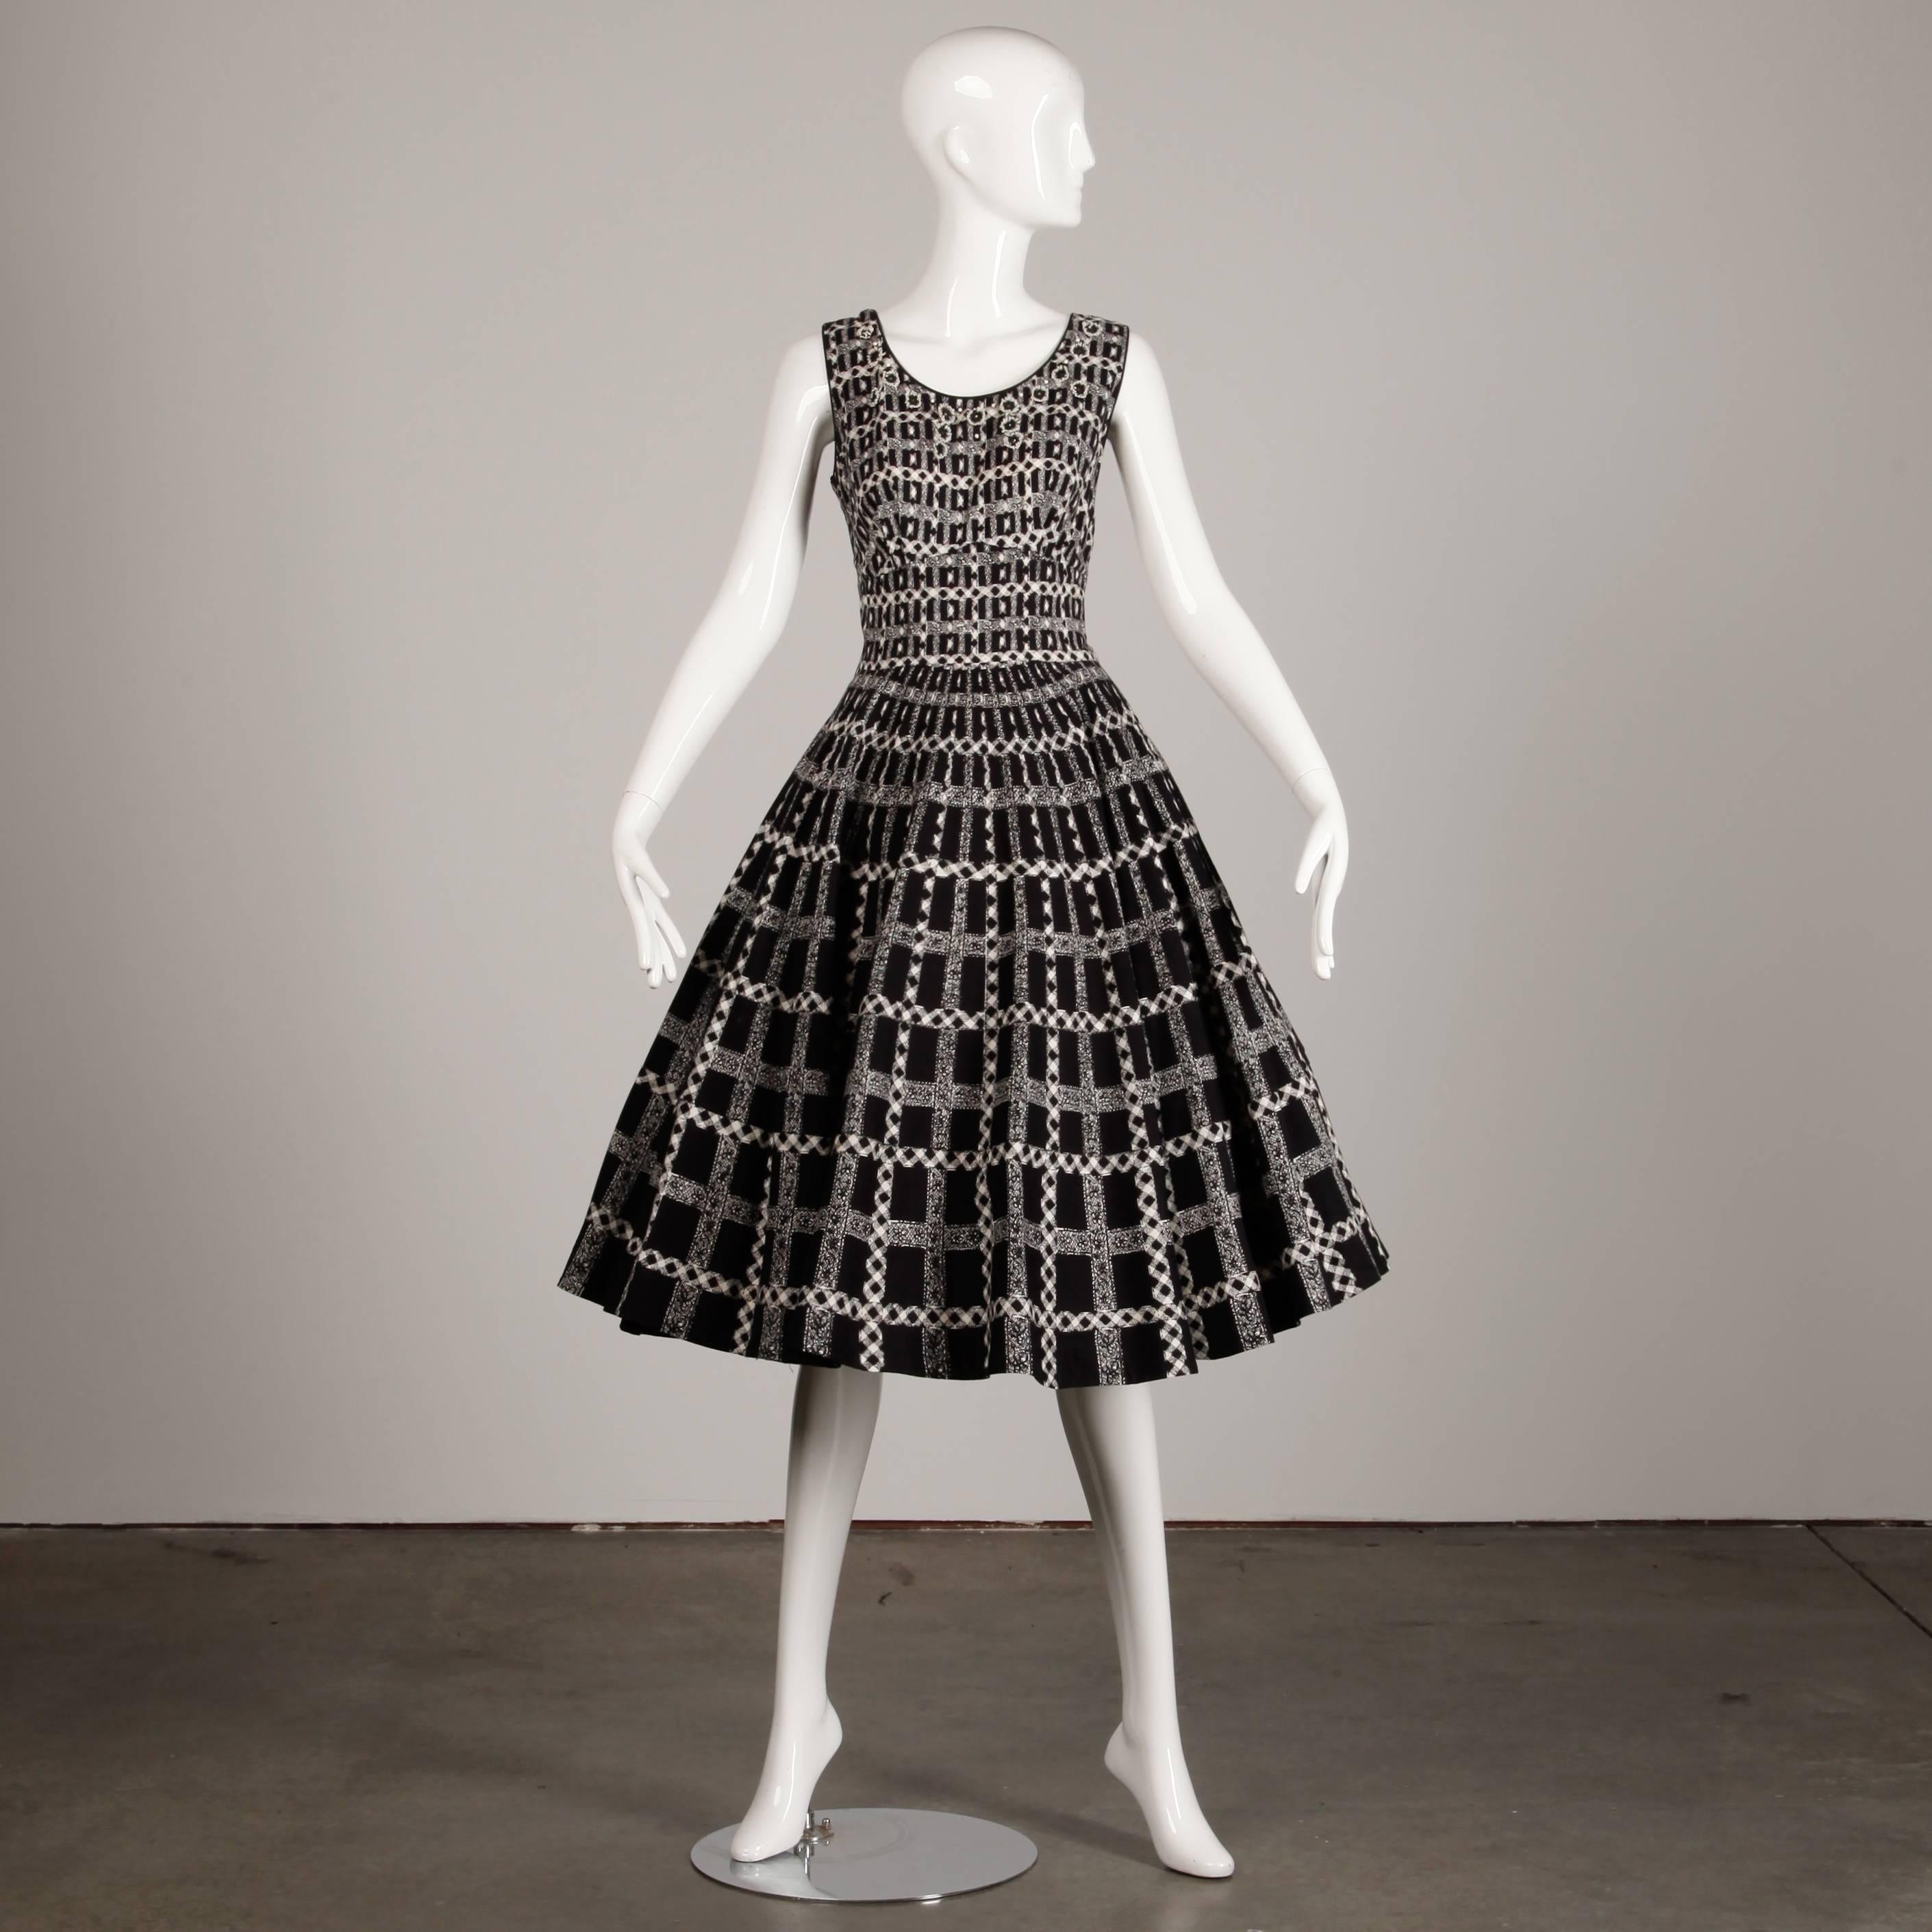 Darling 1950s black and white gingham cotton patio dress with prong set rhinestone flower appliques. Full sweep. Unlined with side metal zip closure. Dress is pictured with a crinoline under the skirt which is not included. Fits like a modern size